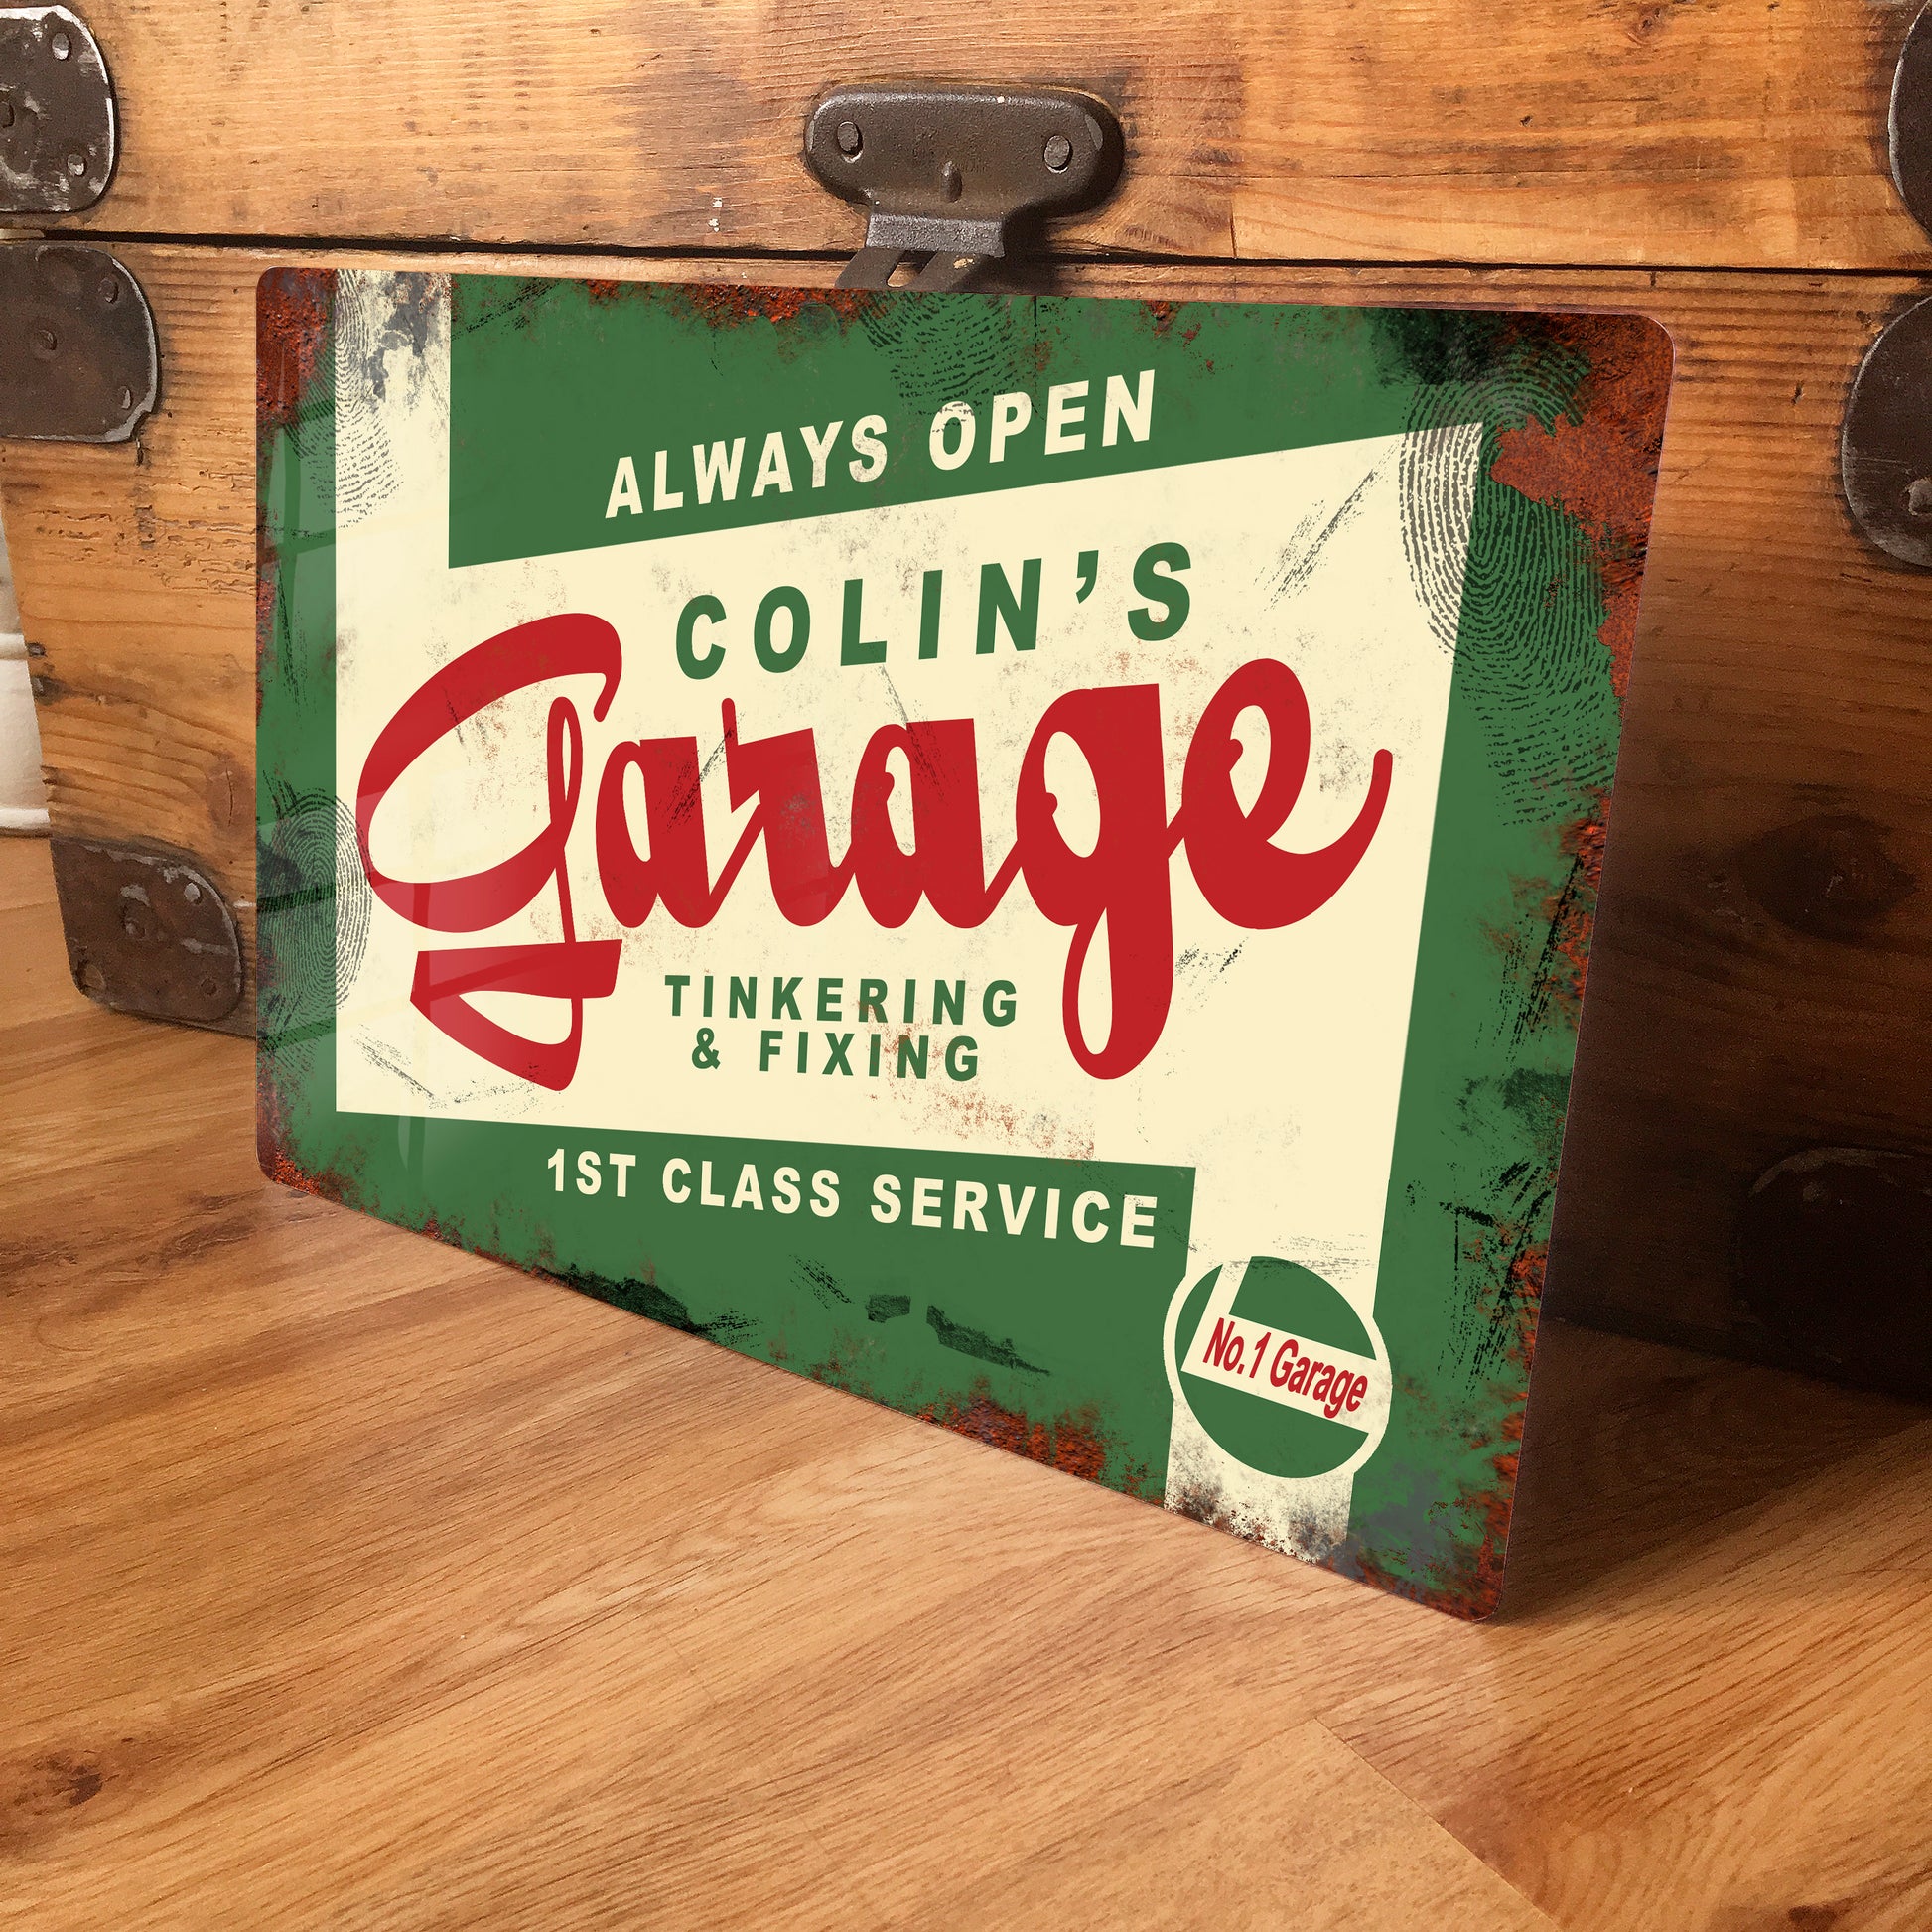 Vintage Retro Garage sign made from metal - Personalised Gift